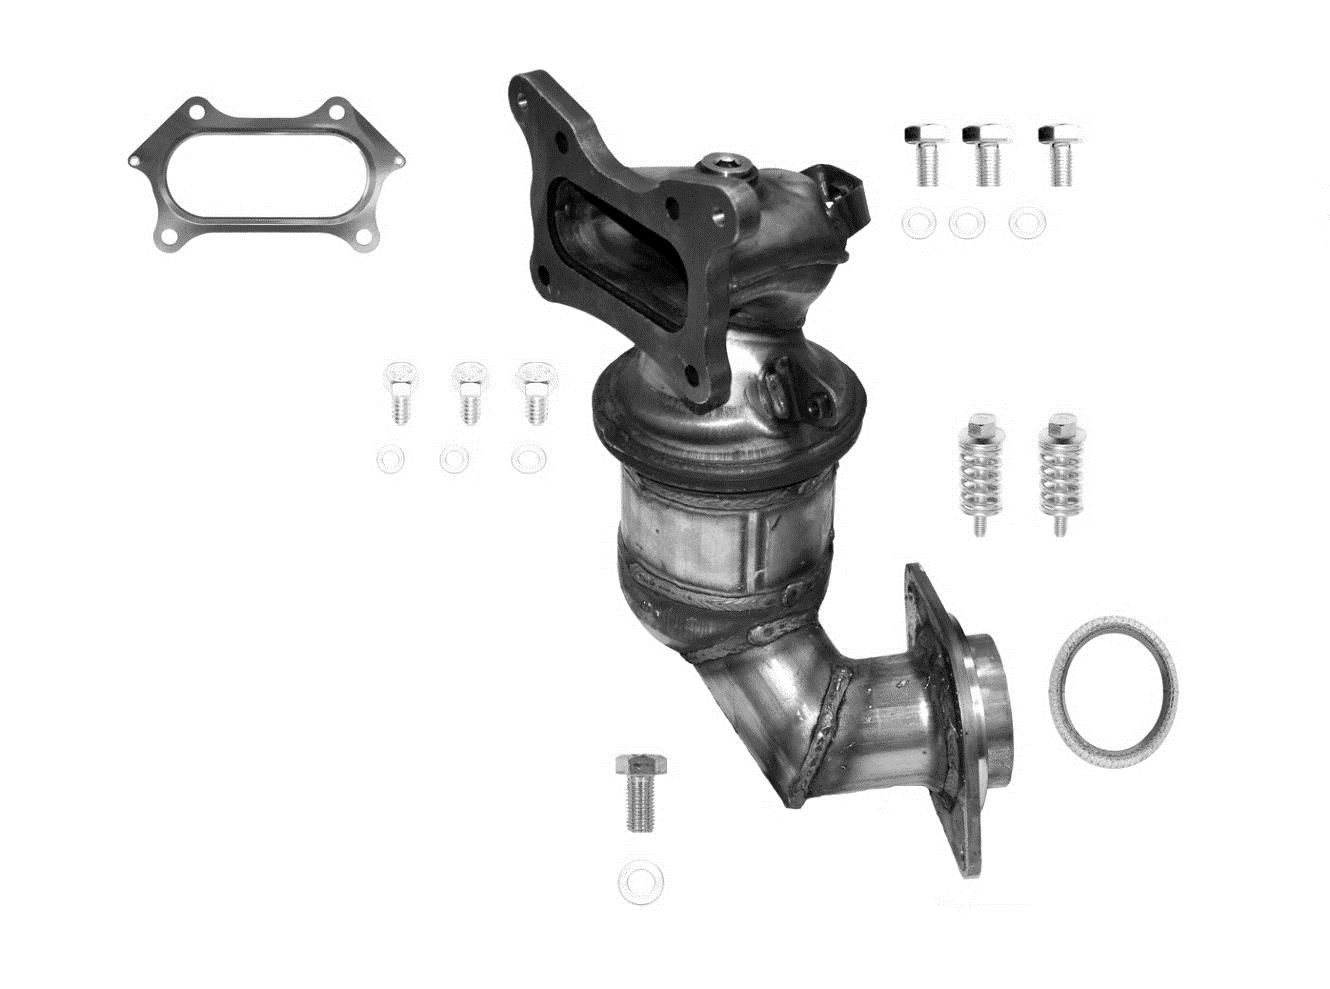 Fits: 2013 - 2015 Acura ILX with 2.4L Engine/2012 - 2015 Honda Civic with 2.4L Engine